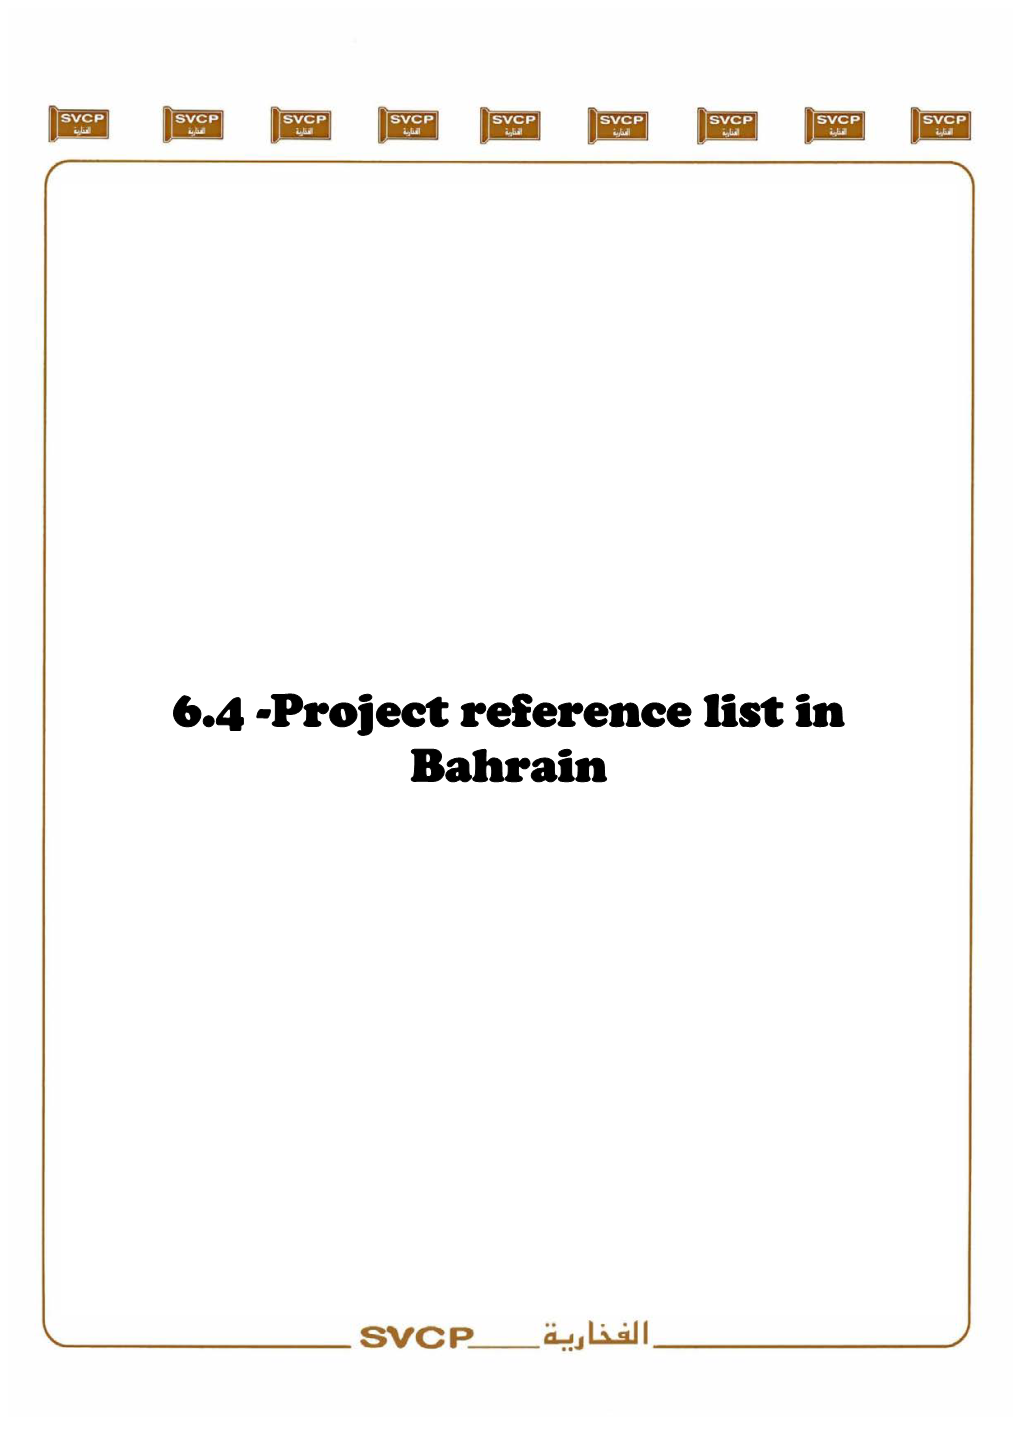 6.4 -Project Reference List in Bahrain